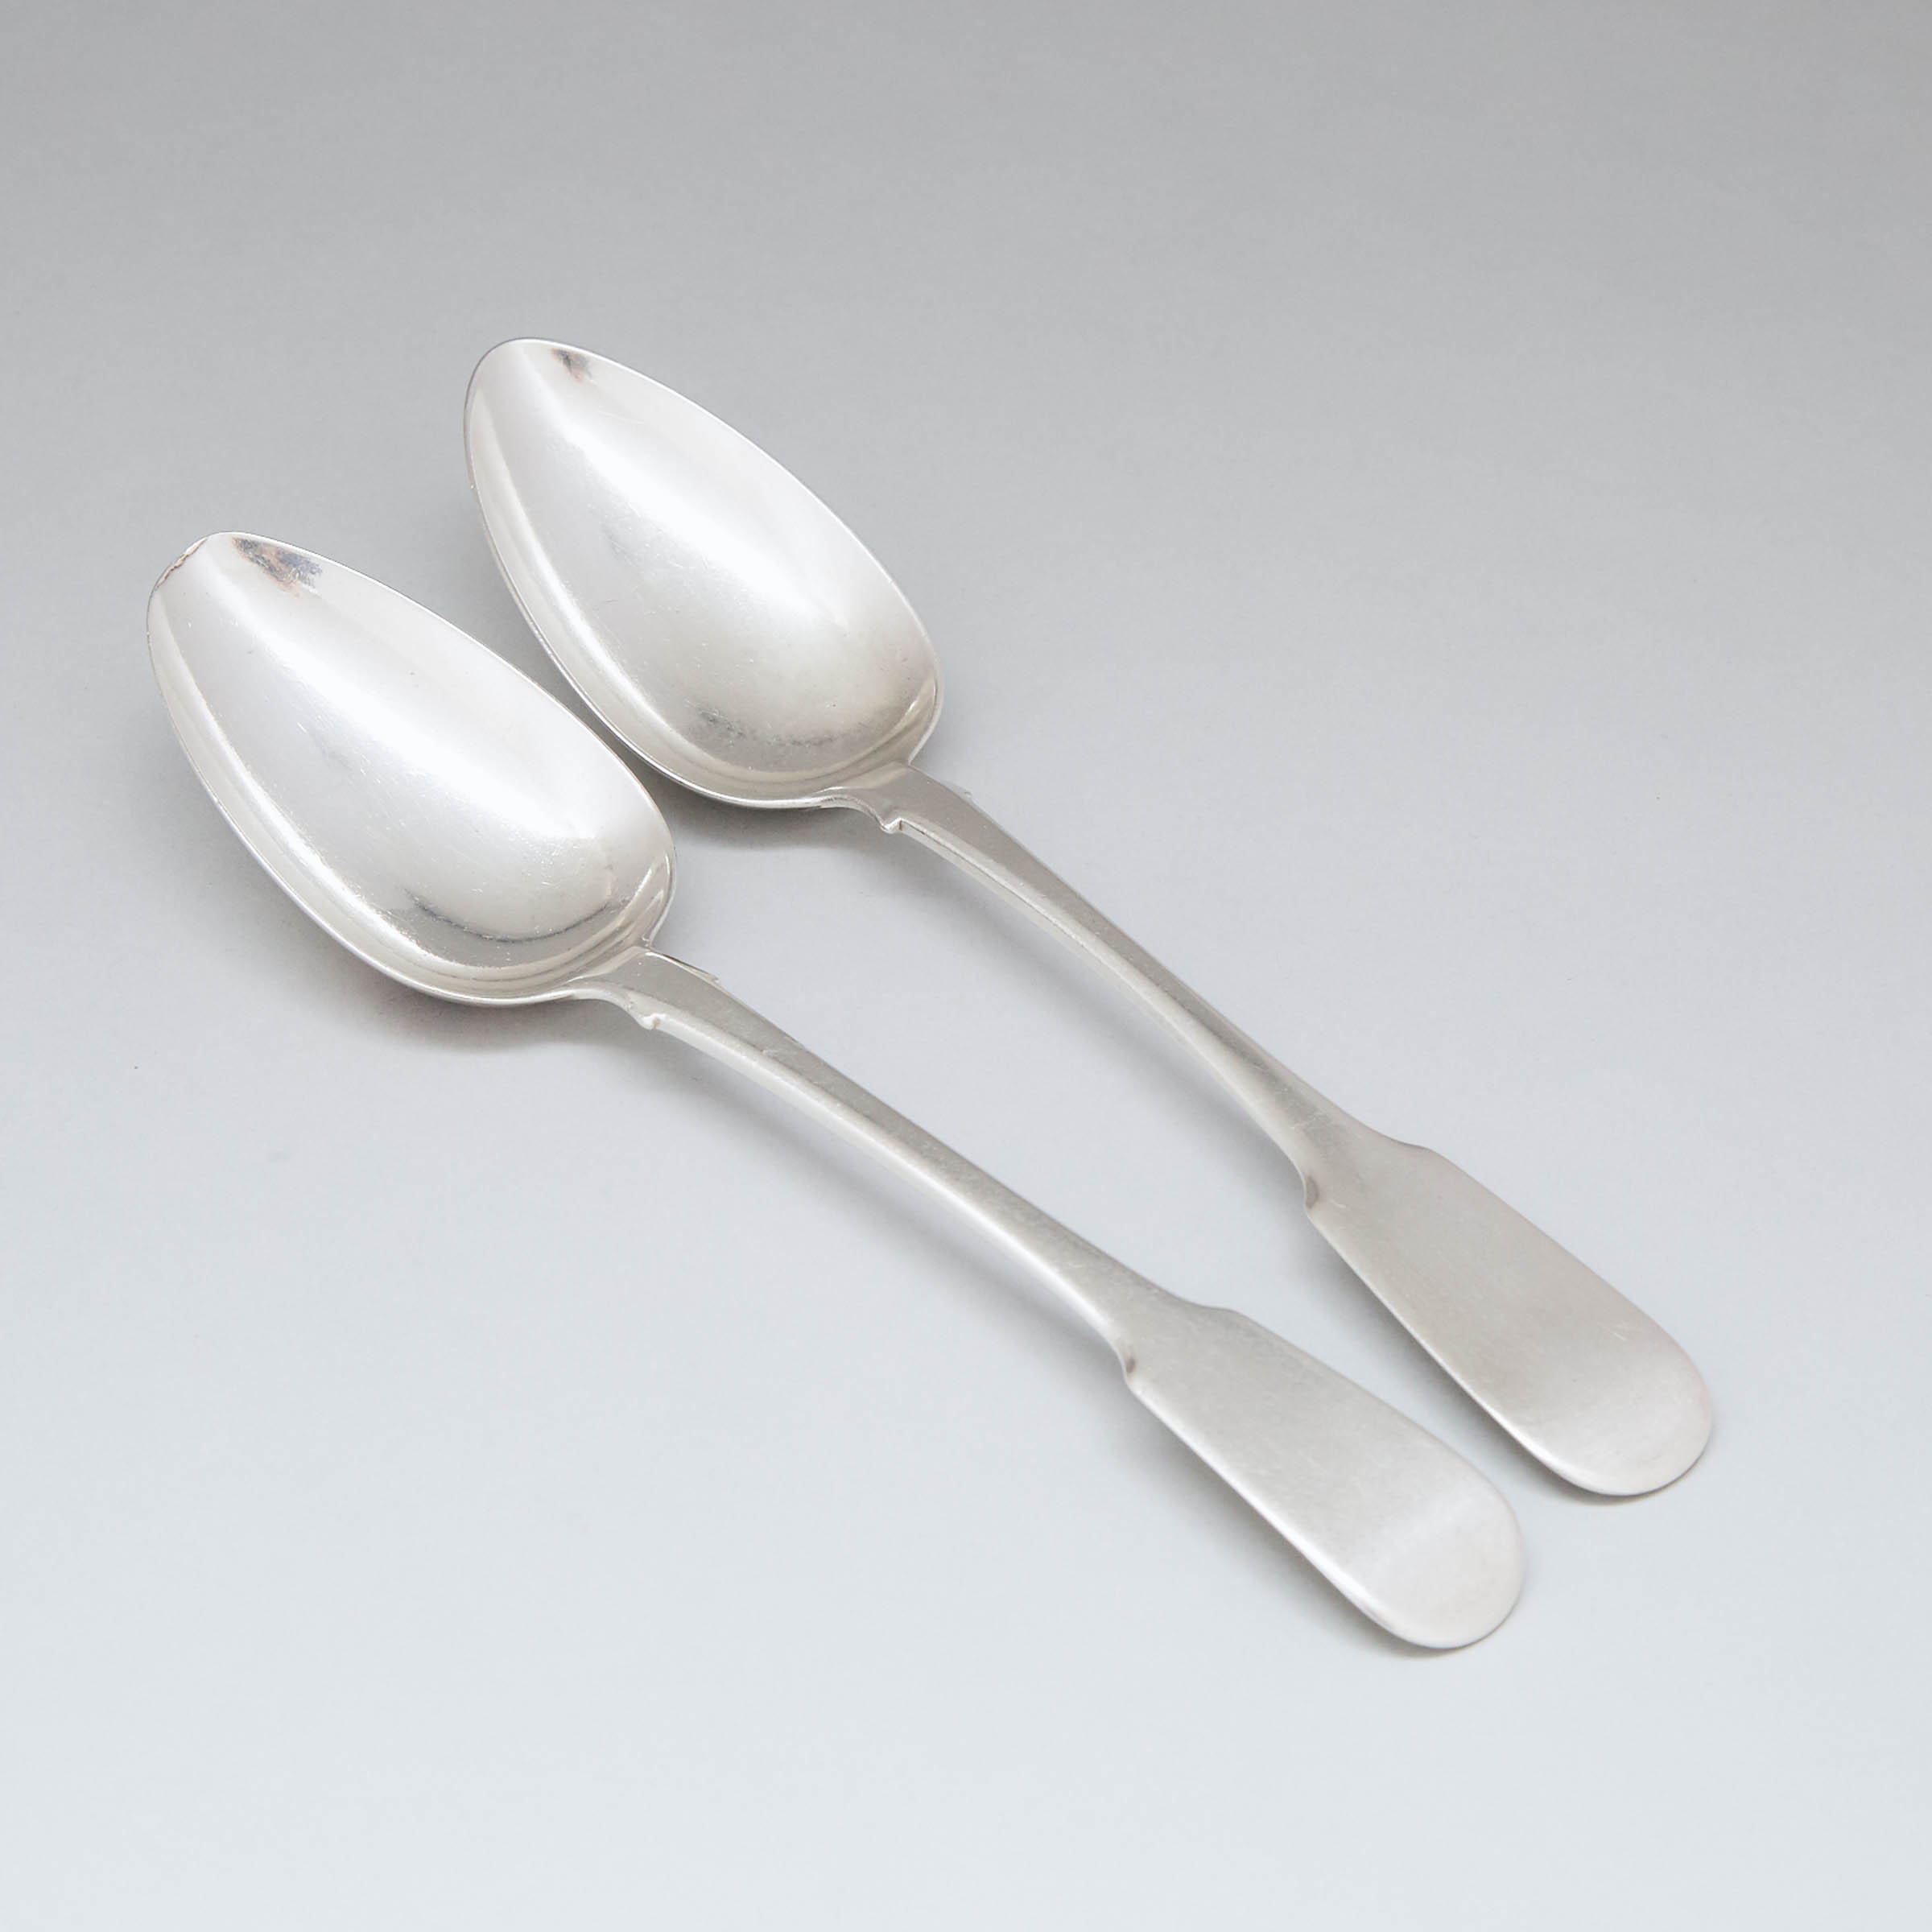  Two Canadian Silver Fiddle Pattern Table Spoons, Laurent Amiot, Quebec City, Que., c.1820-30